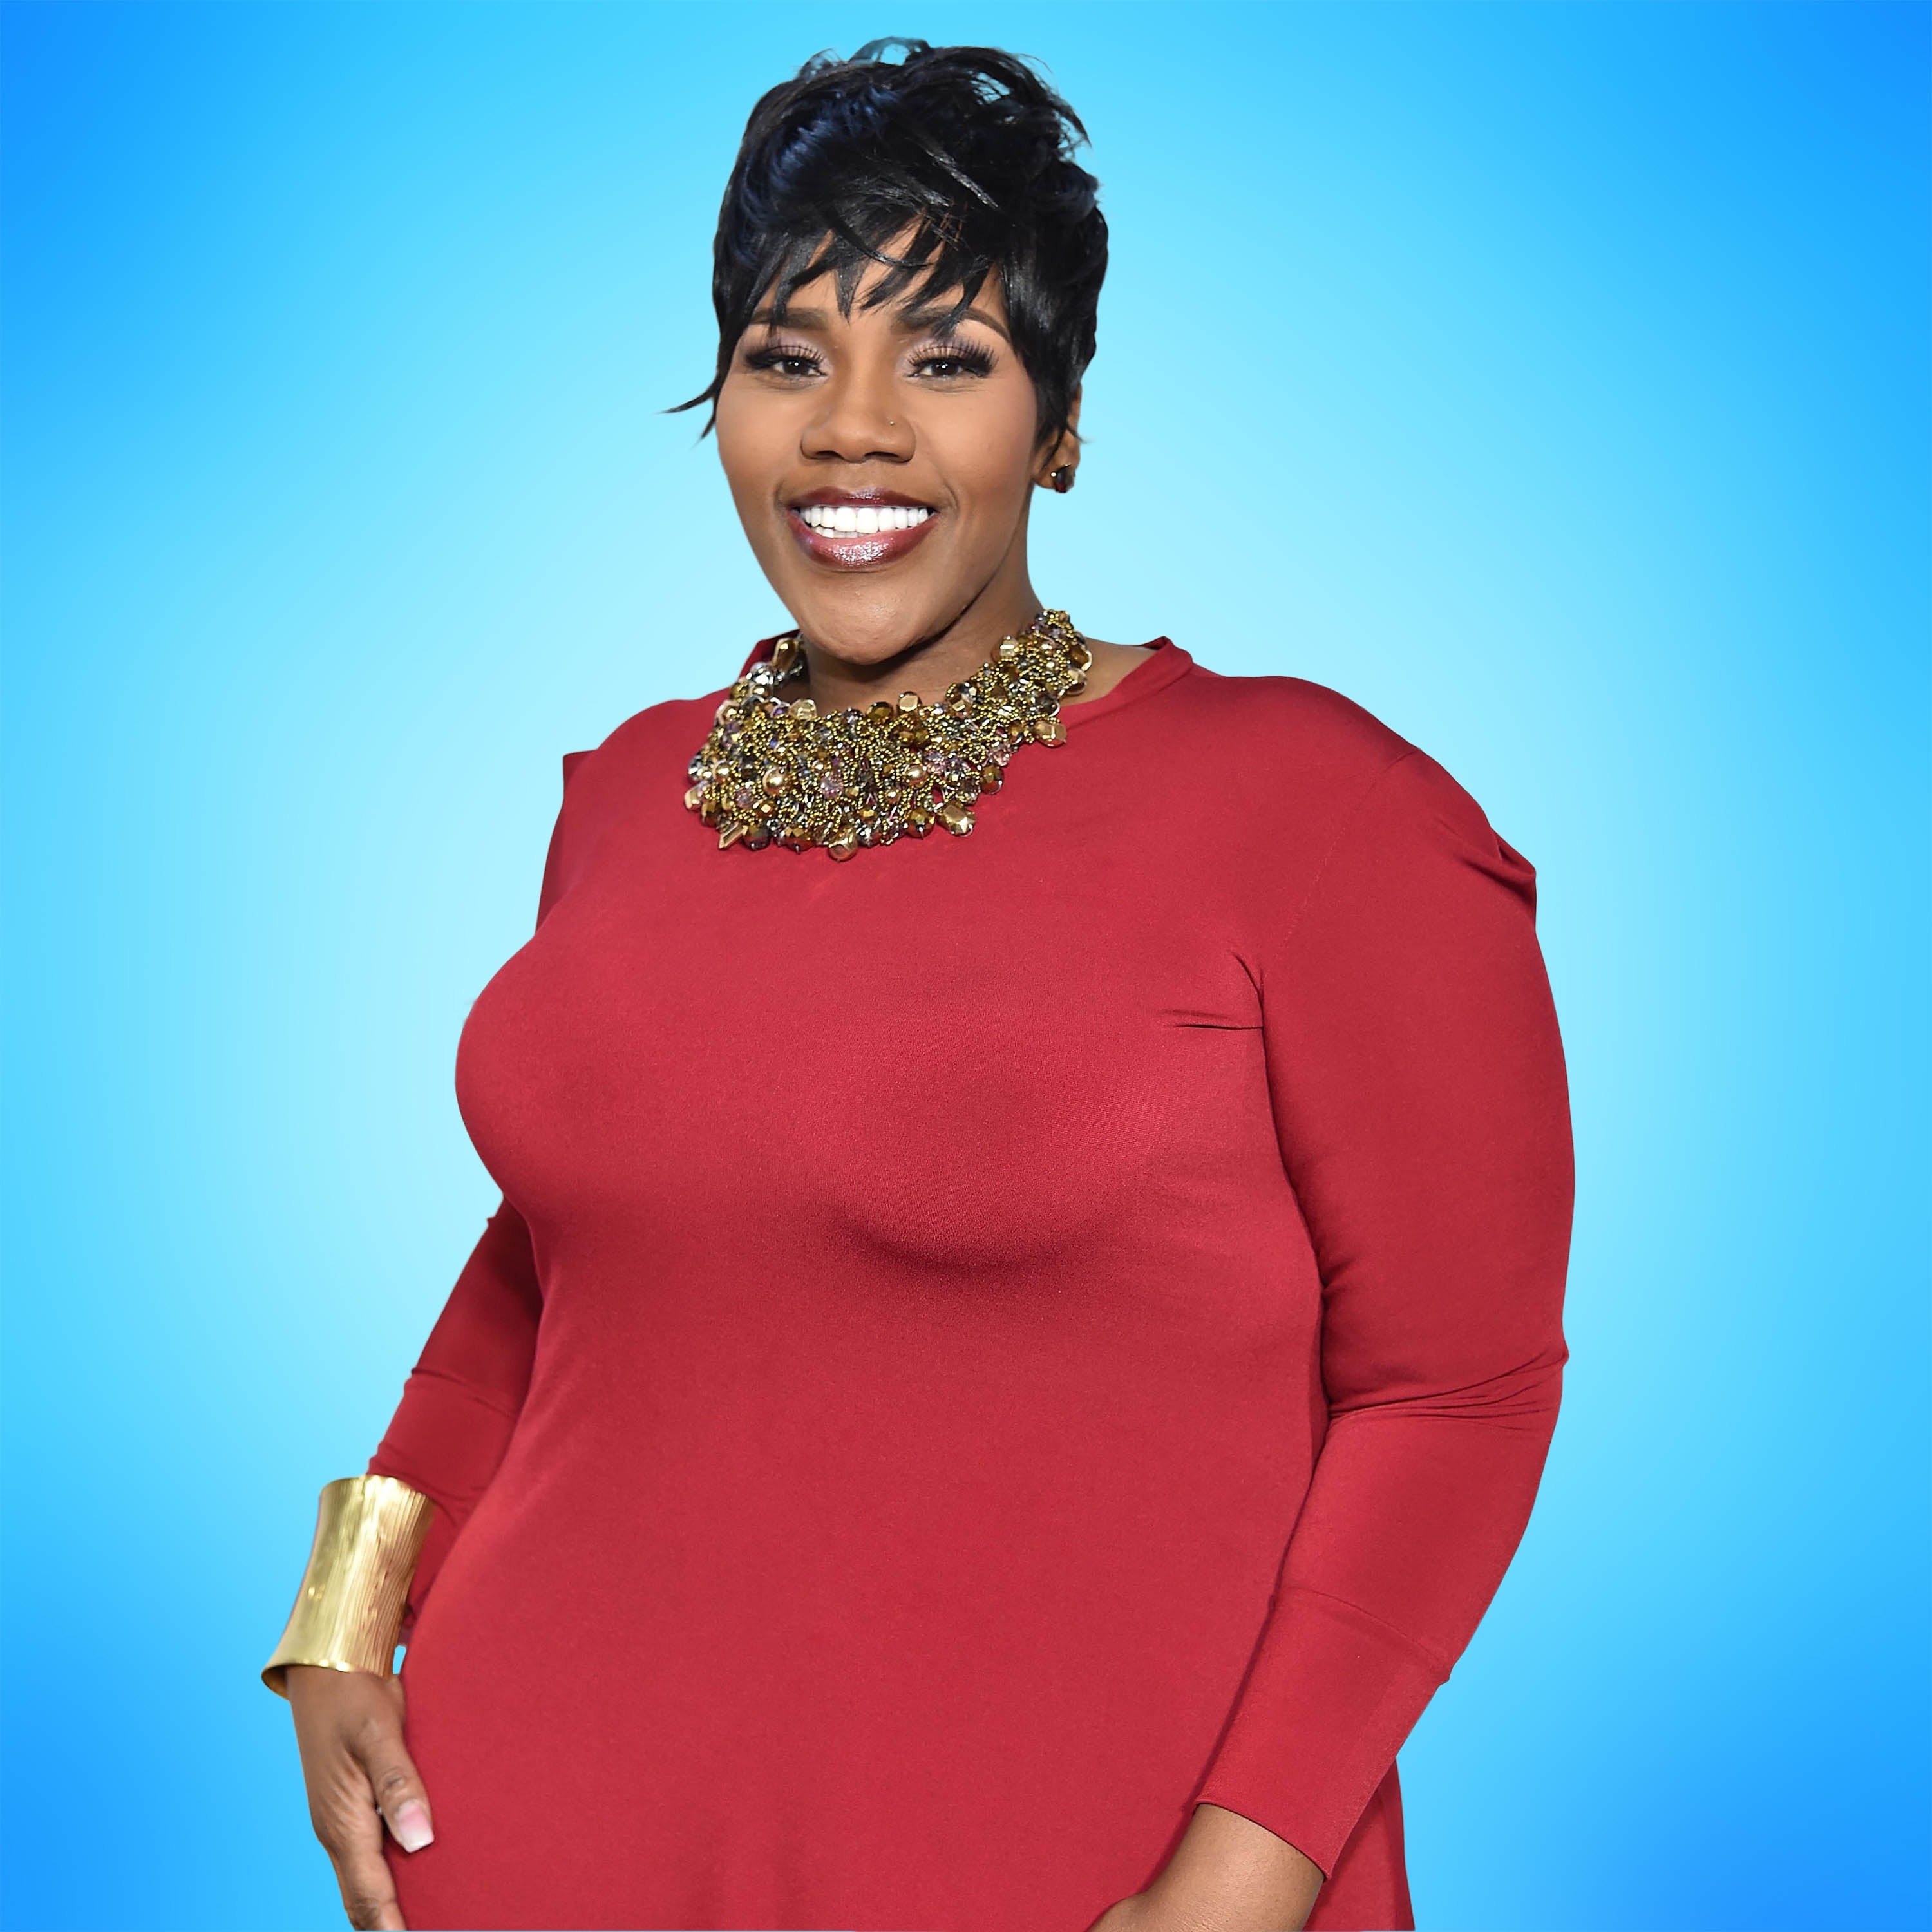 EXCLUSIVE: Kelly Price On Her Grandmother's Influence, Making ESSENCE Fest A Family Affair, And Her Favorite New Music 
